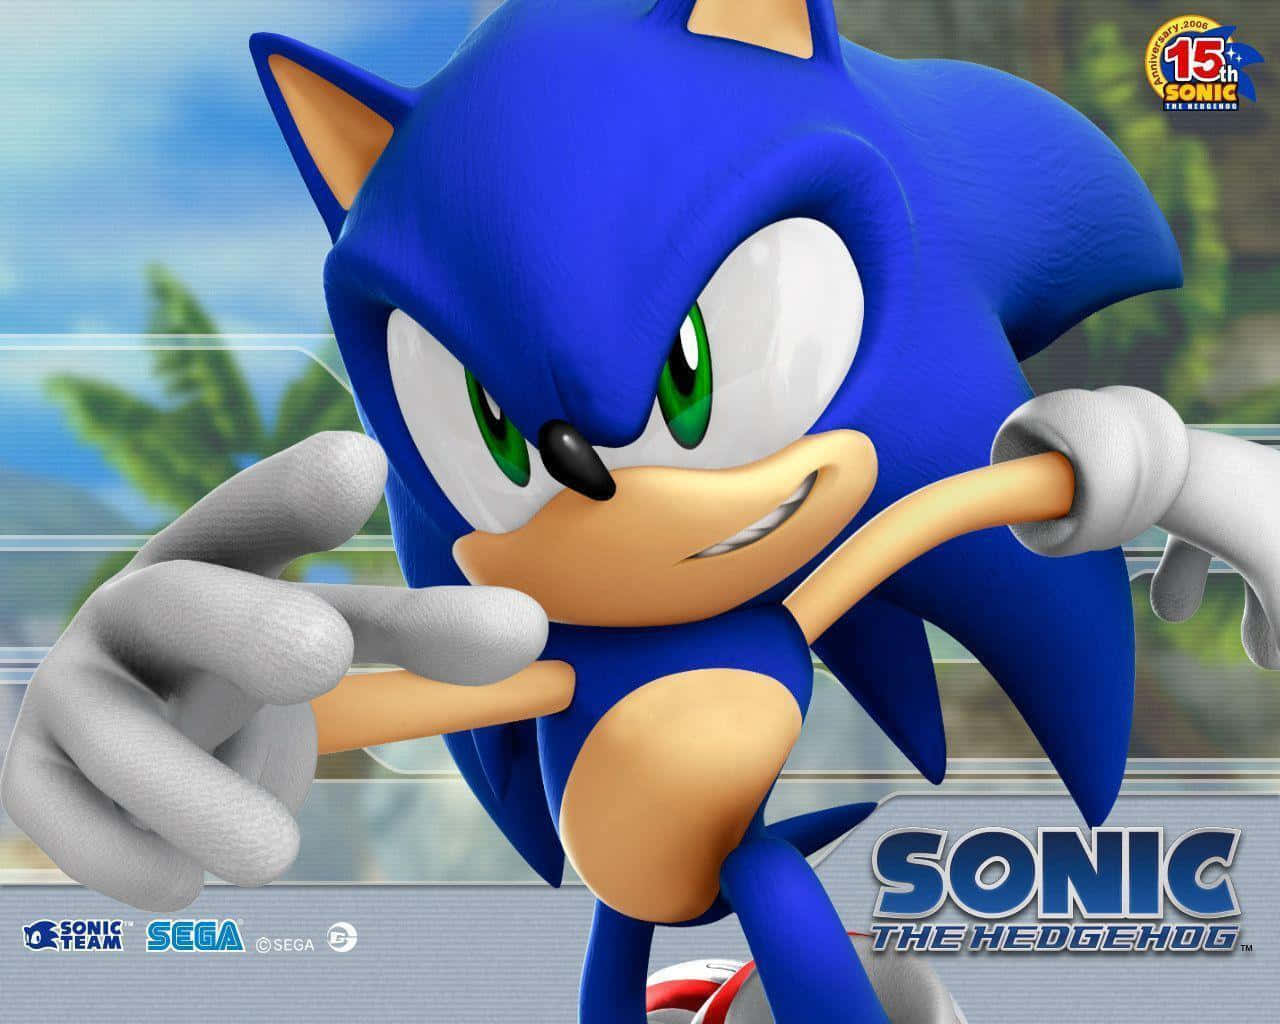 Sonic The Hedgehog: Faster than Ever!